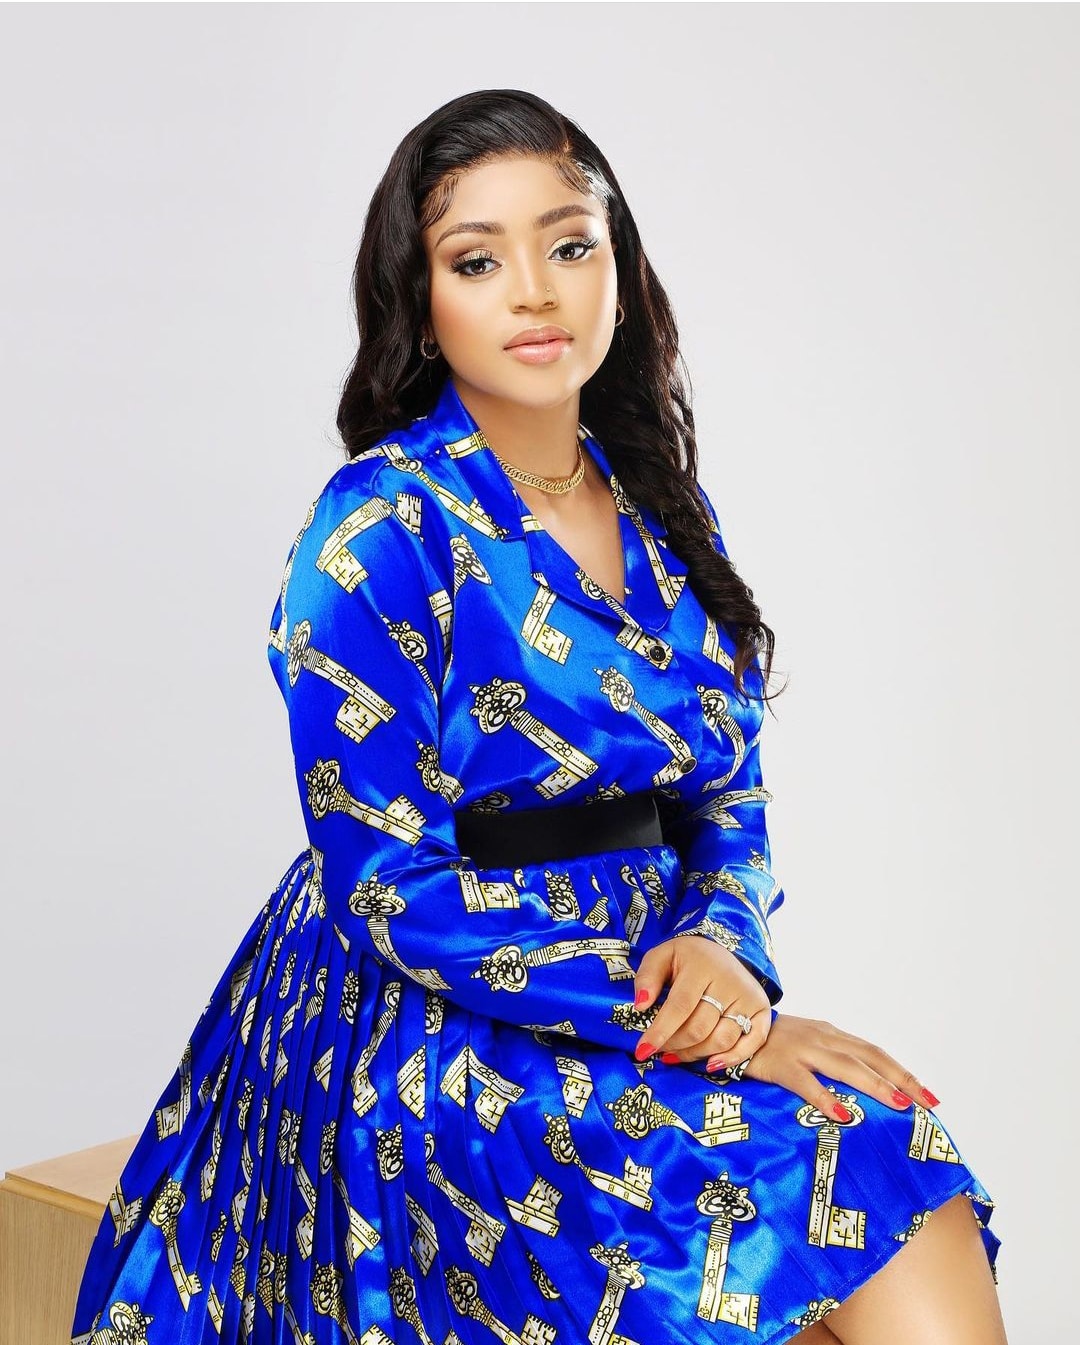 Regina Daniels climbs Mount Ned Nwoko for the first time, shares her  experience – The Daily Page